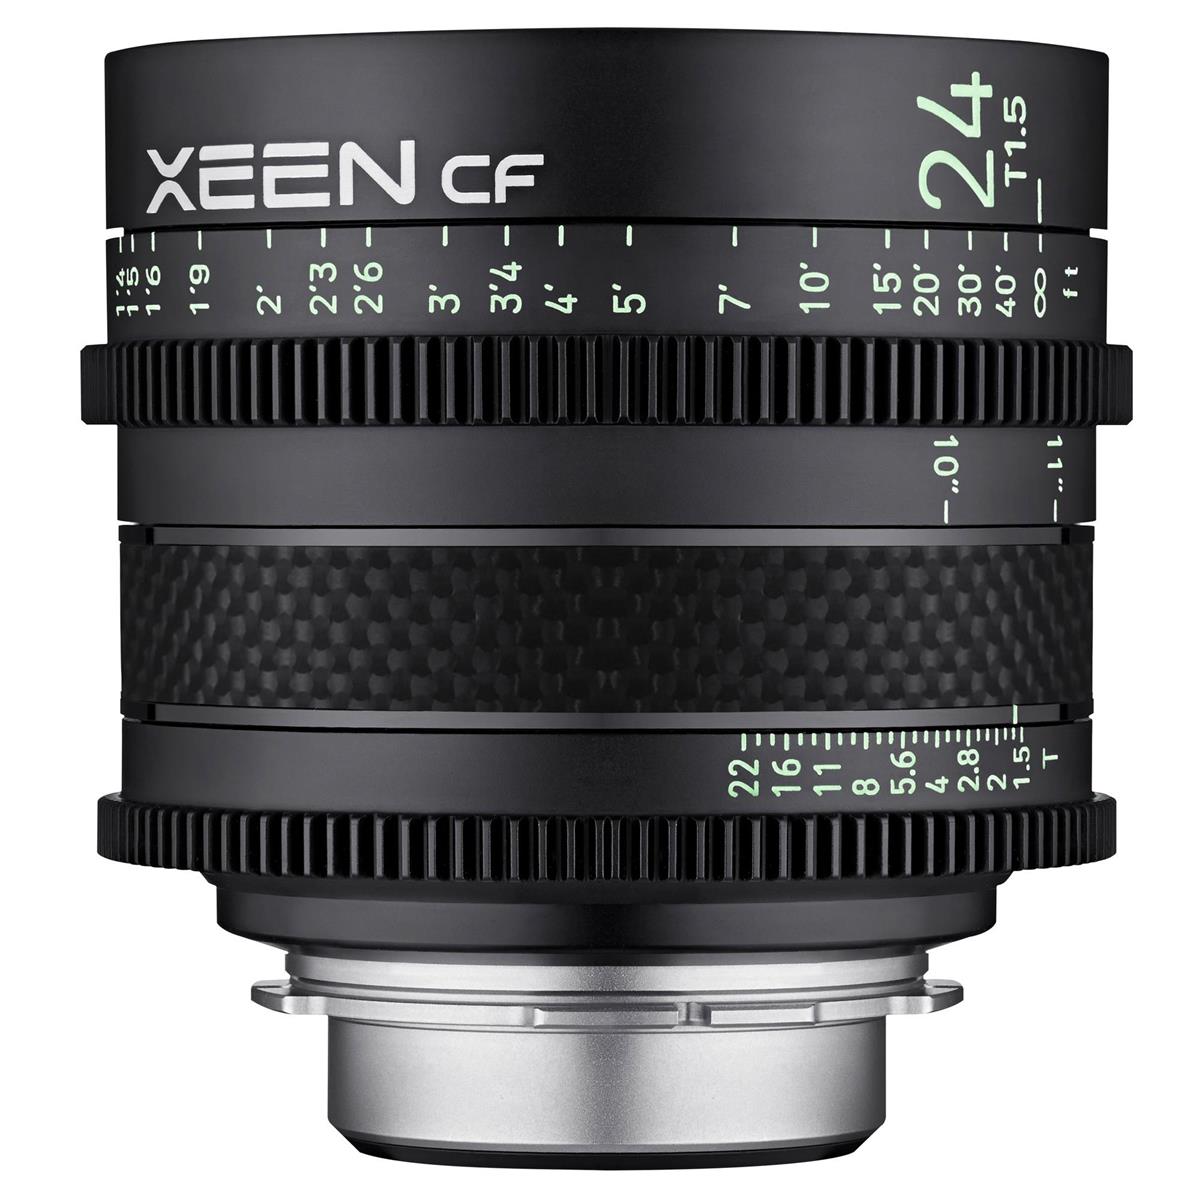 Rokinon XEEN CF 24mm T1.5 Pro Cine Lens for Canon EF $899 + free s/h